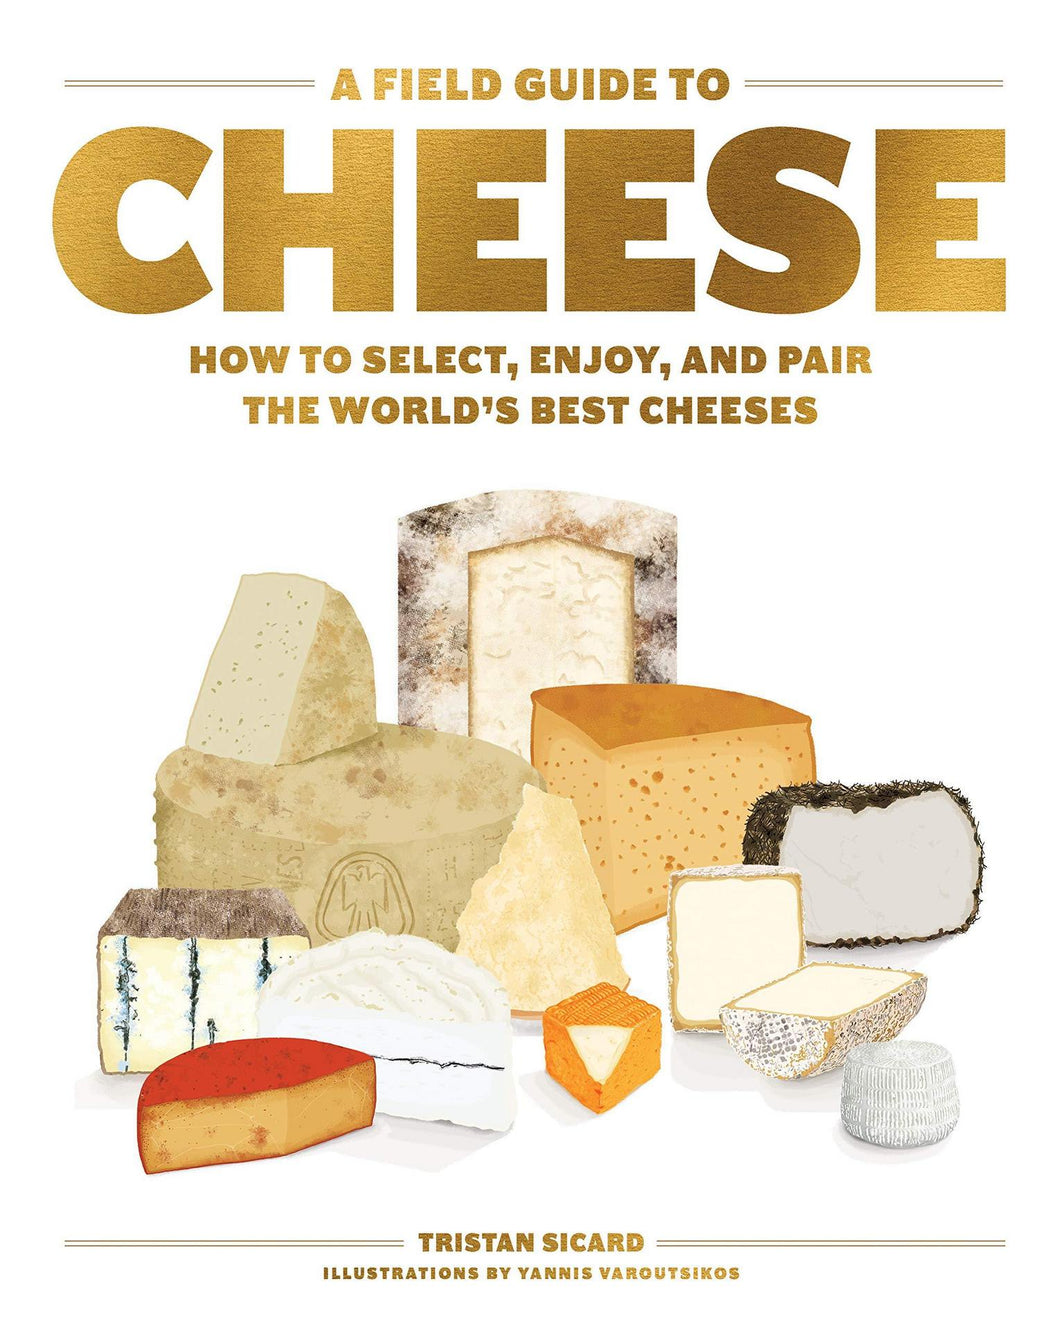 A Field Guide to Cheese: How to Select, Enjoy, and Pair the World's Best Cheeses Hardcover